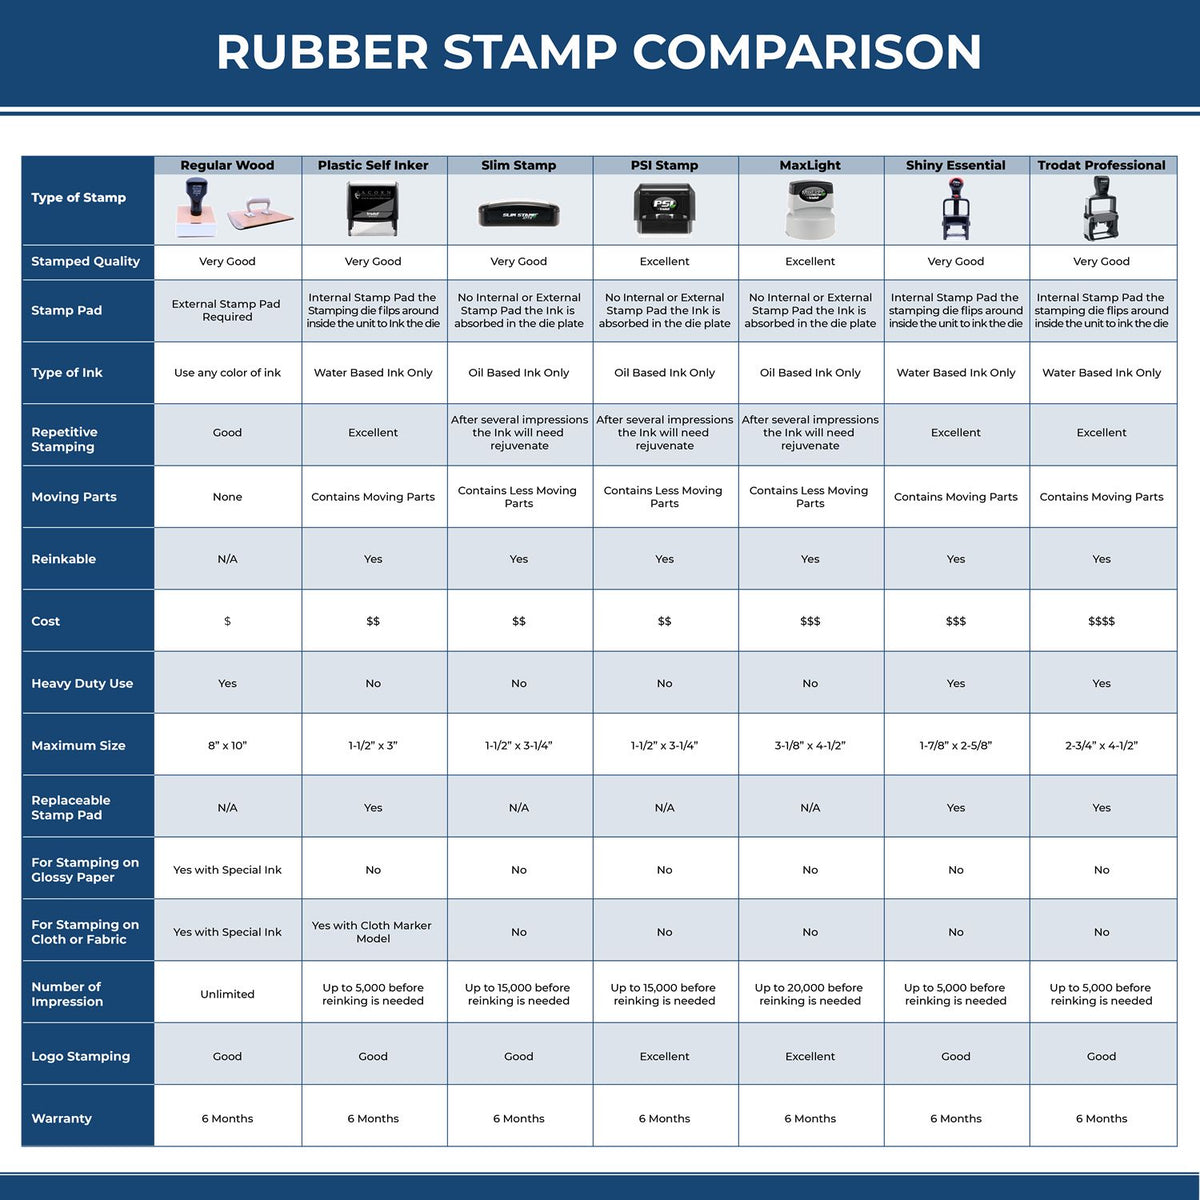 A comparison chart for the different types of mount models available for the MaxLight Premium Pre-Inked Louisiana State Seal Notarial Stamp.